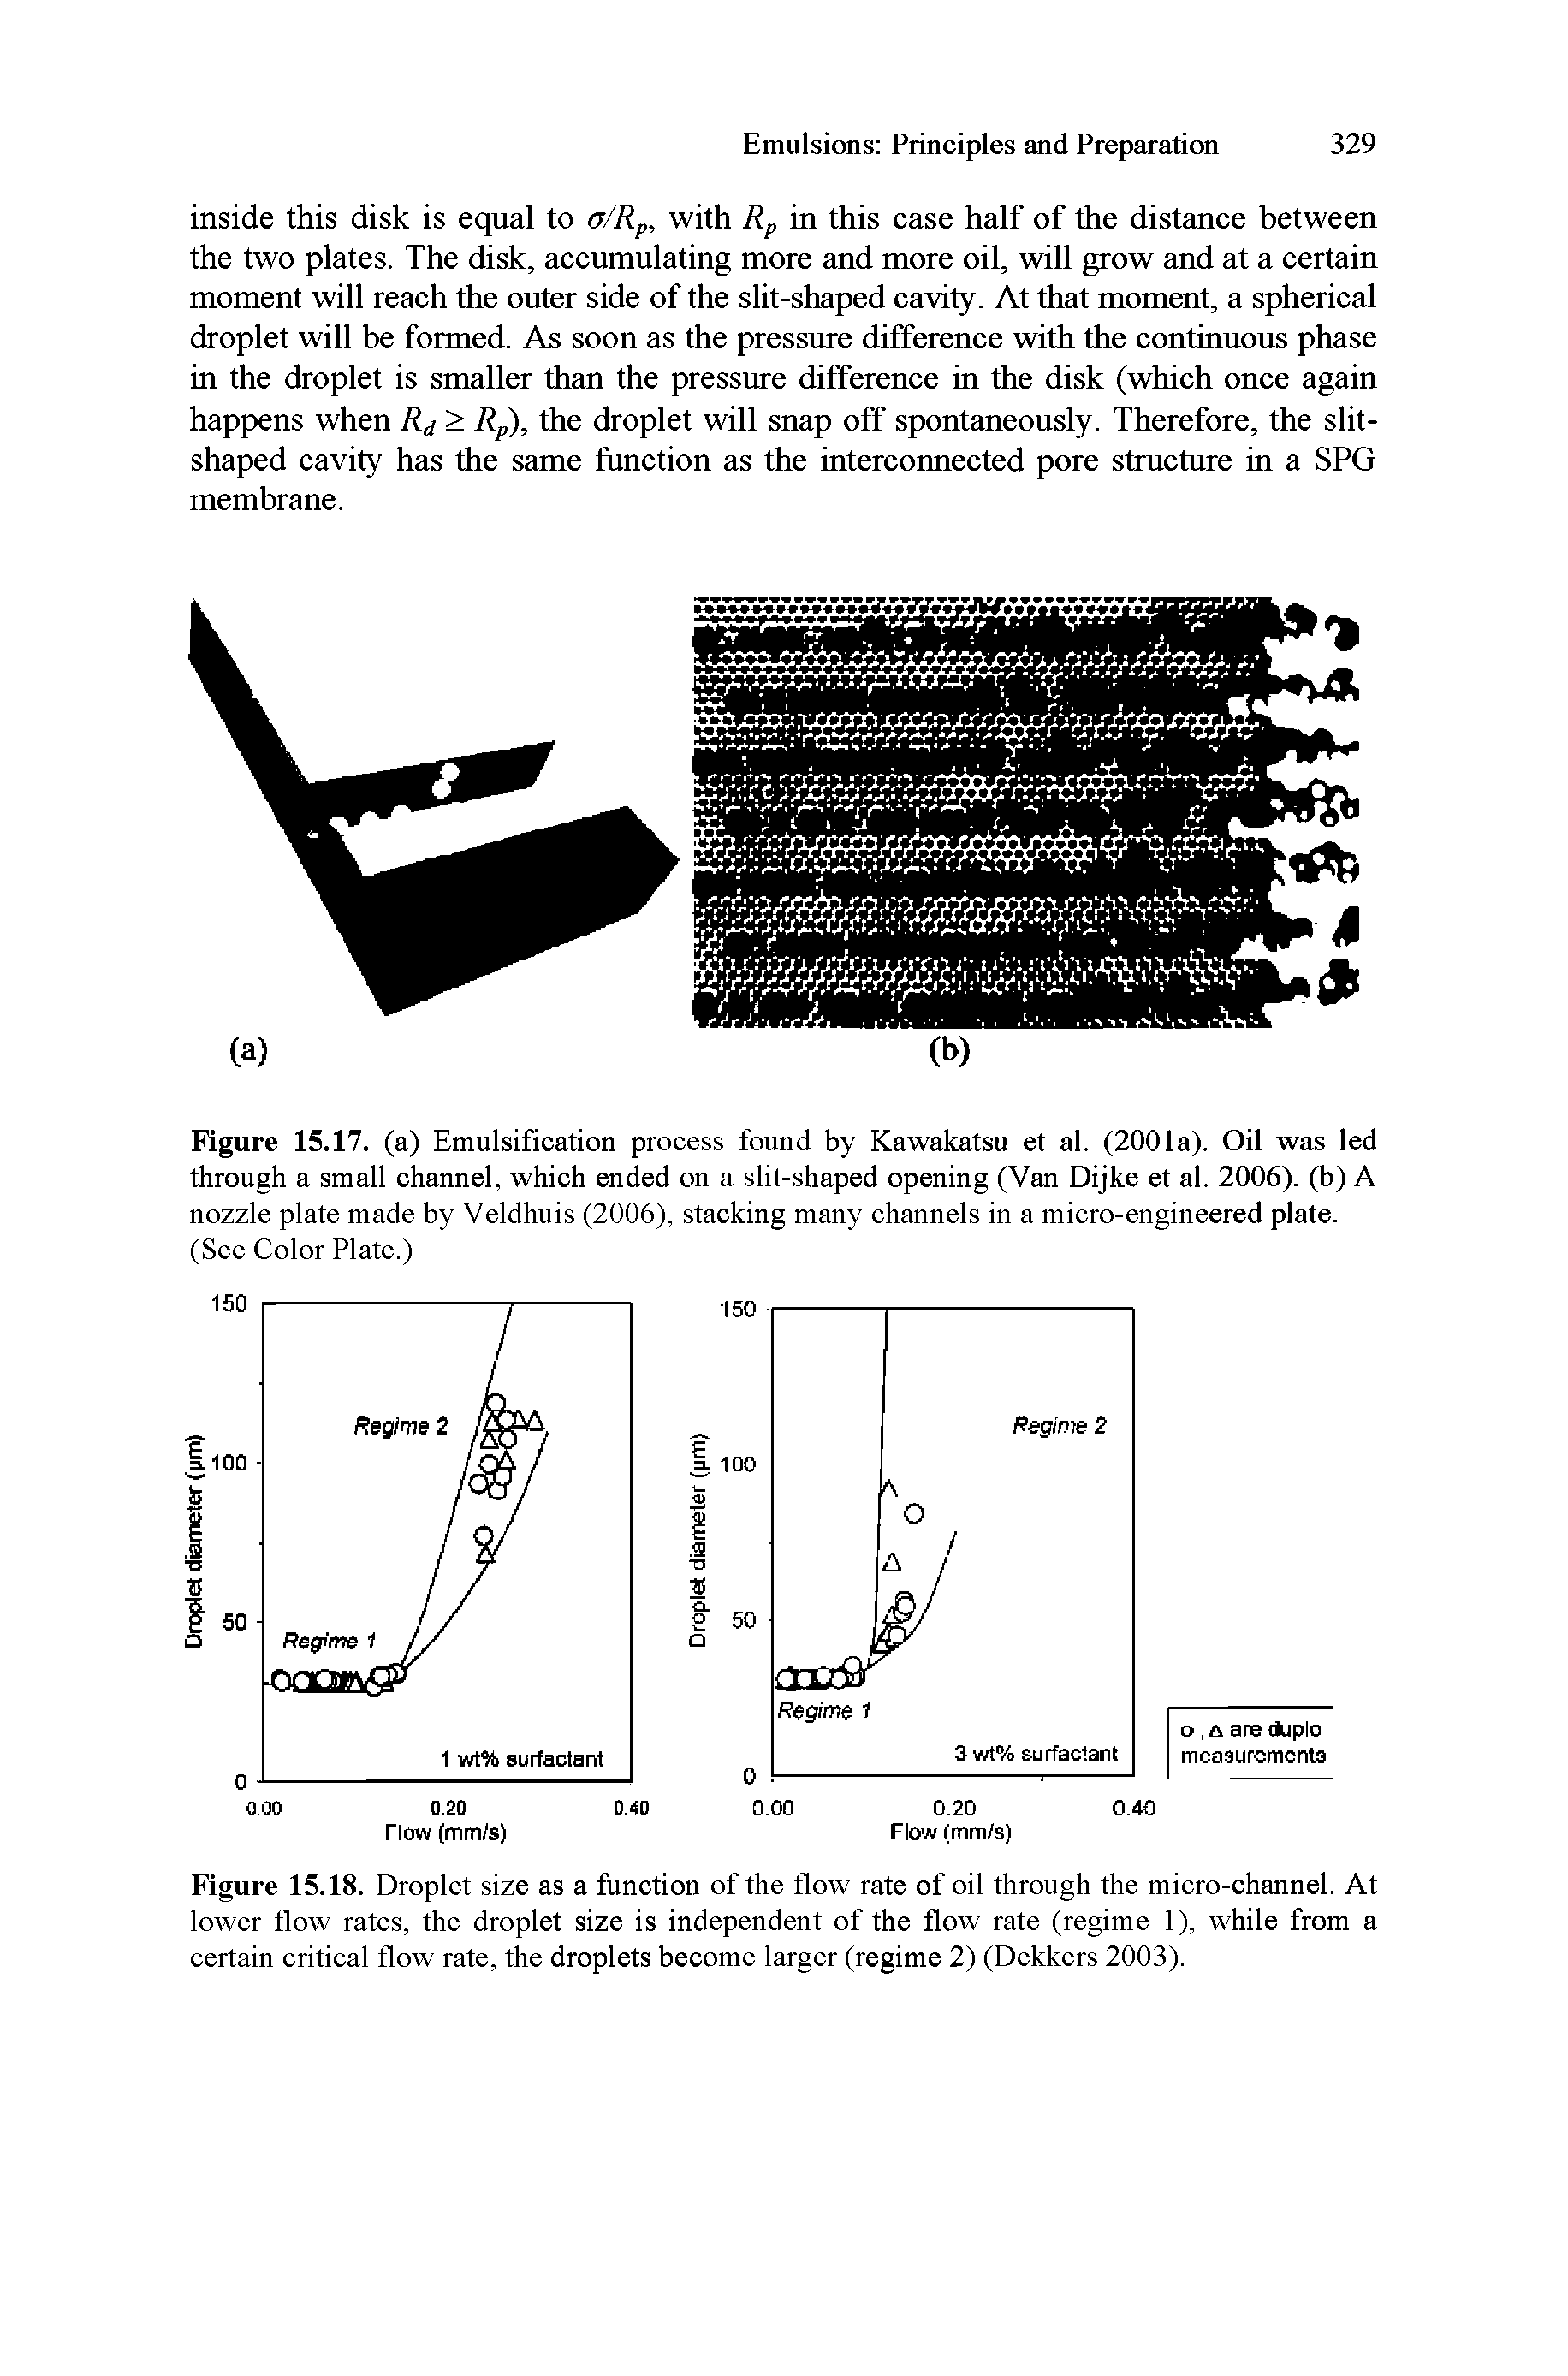 Figure 15.18. Droplet size as a function of the flow rate of oil through the micro-channel. At lower flow rates, the droplet size is independent of the flow rate (regime 1), while from a certain critical flow rate, the droplets become larger (regime 2) (Dekkers 2003).